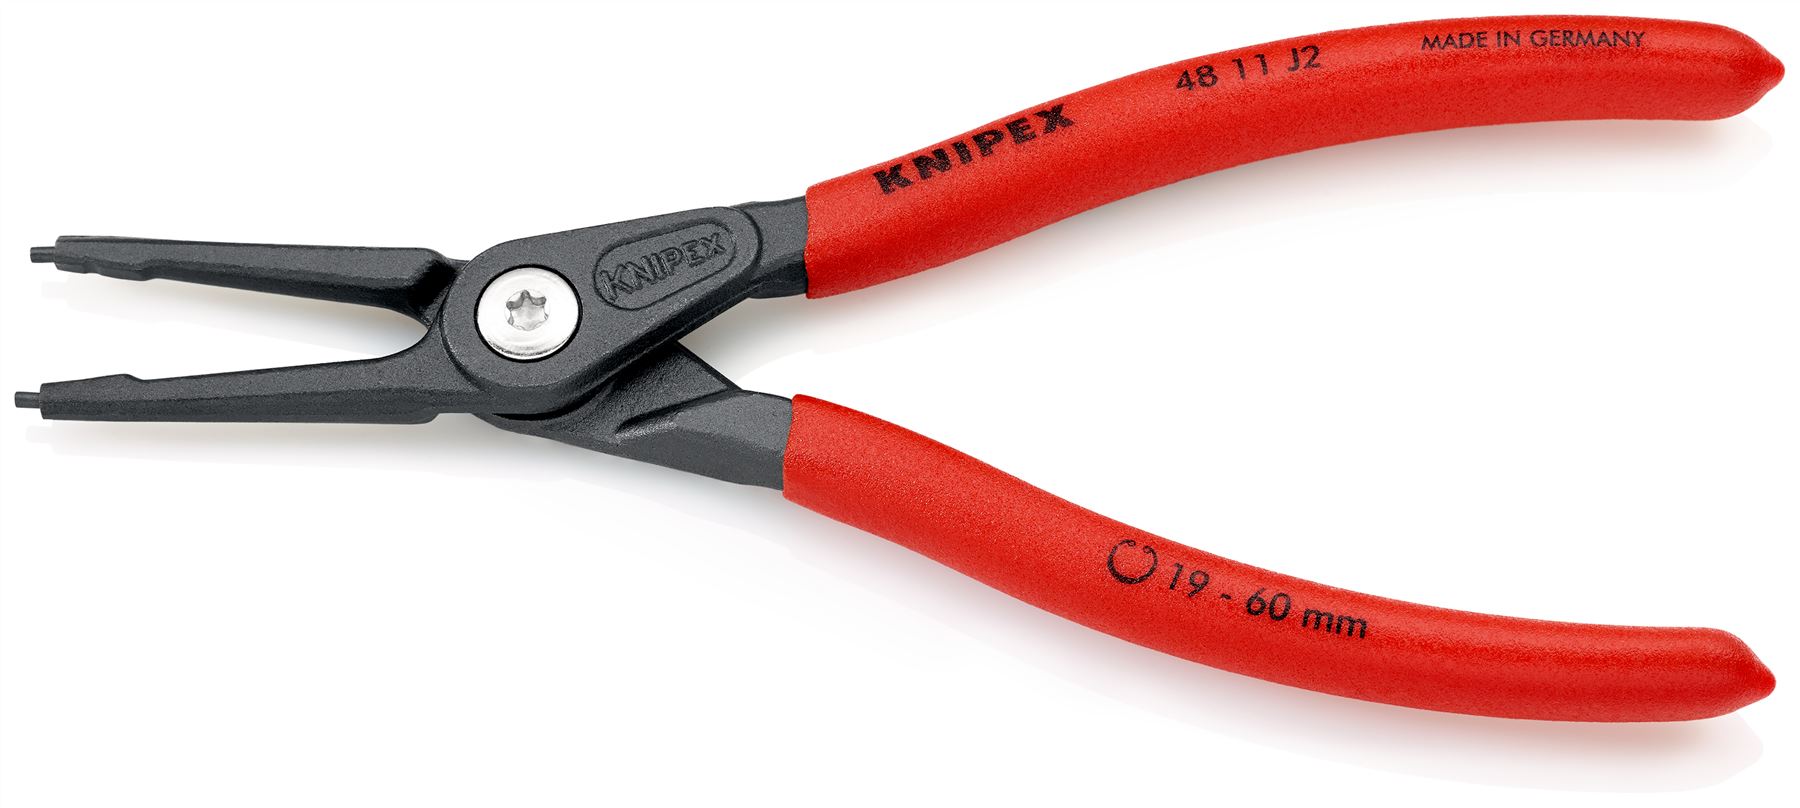 KNIPEX Precision Circlip Pliers for Internal Circlips in Bore Holes 180mm 1.8mm Diameter Tips 40 11 J2